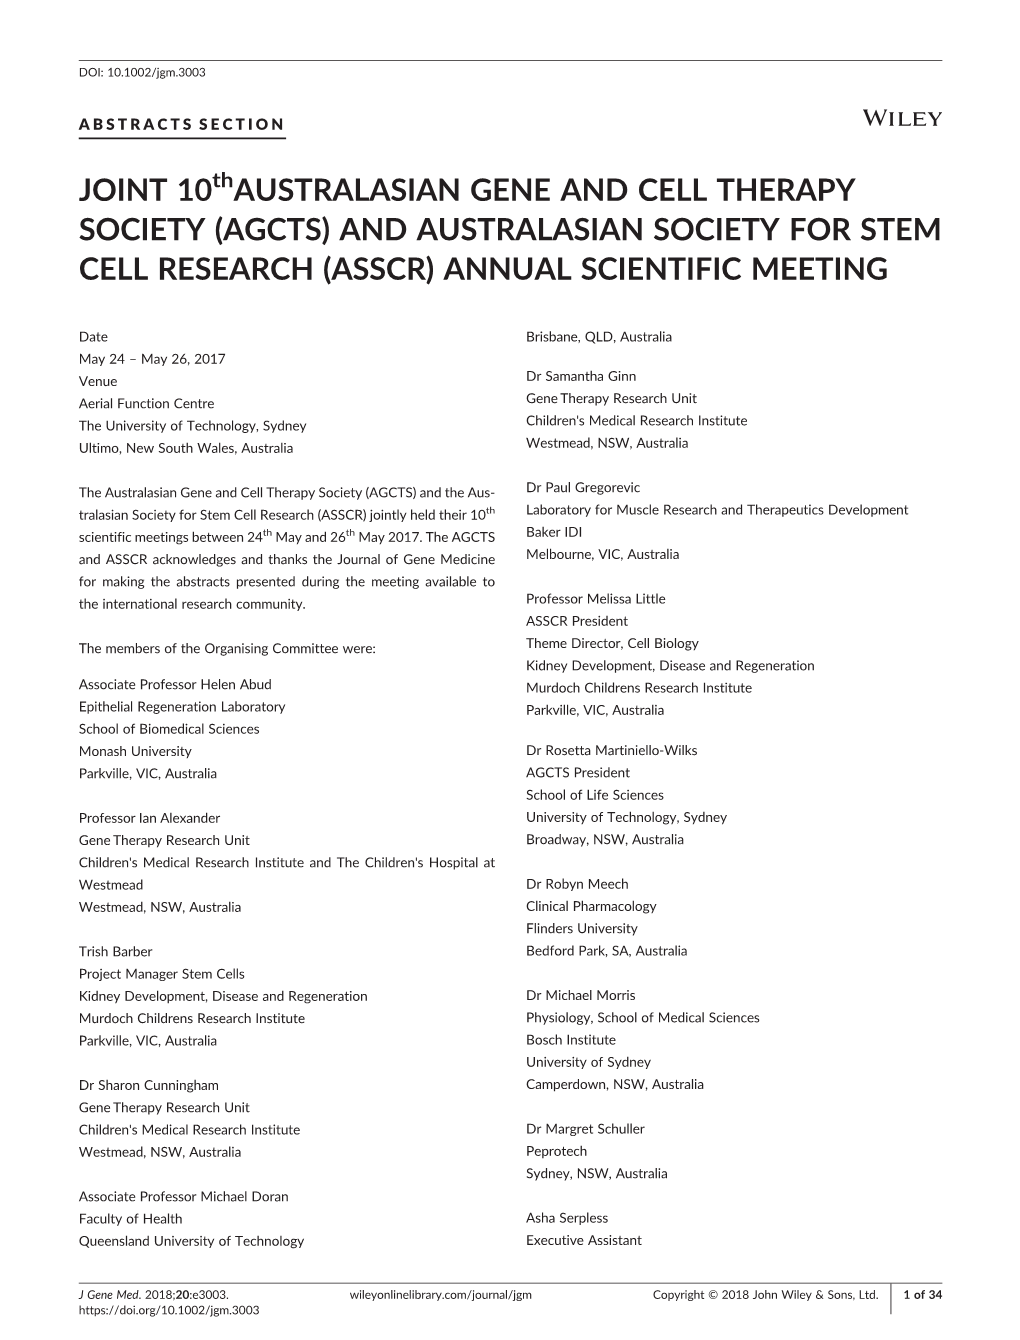 JOINT 10Thaustralasian GENE and CELL THERAPY SOCIETY (AGCTS) and AUSTRALASIAN SOCIETY for STEM CELL RESEARCH (ASSCR) ANNUAL SCIENTIFIC MEETING